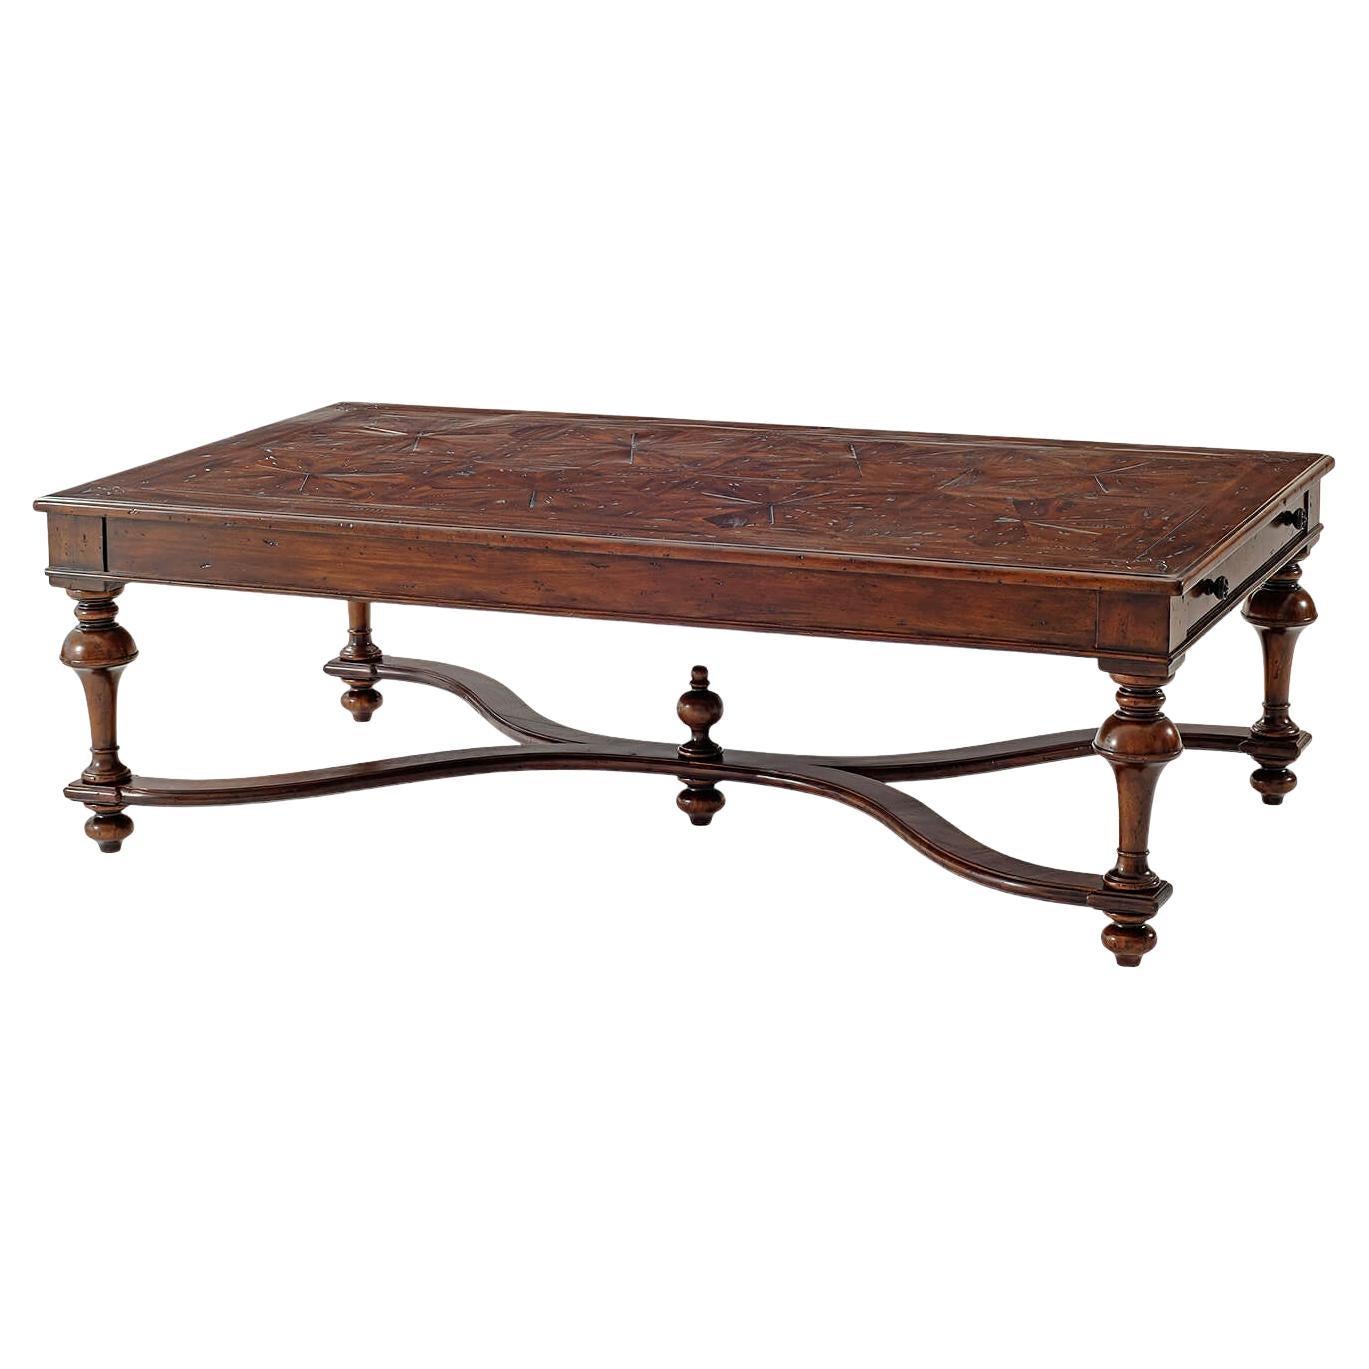 Table basse ancienne William and Mary en vente